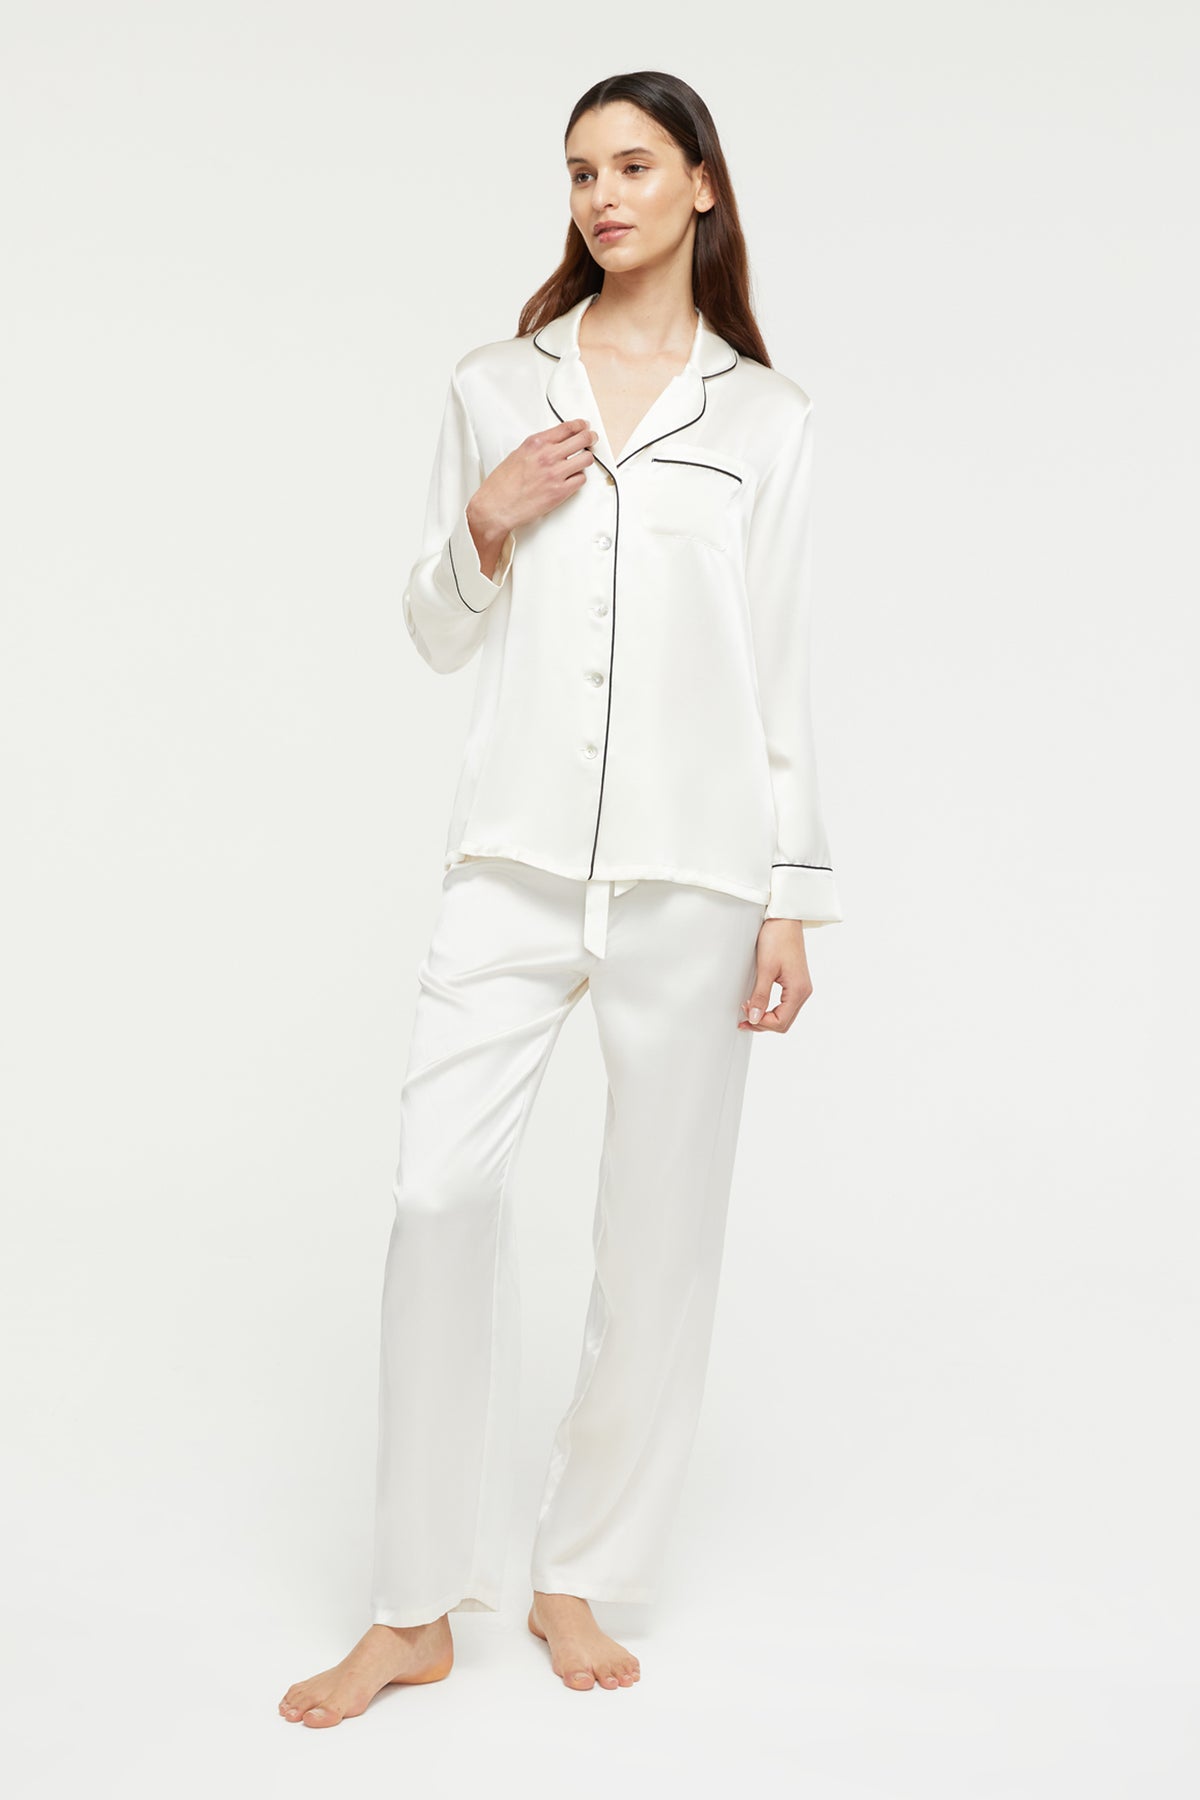 The Fine Finishes Pyjama in Creme is a Ginia Sleepwear signature piece and part of our Silk Basics collection. 